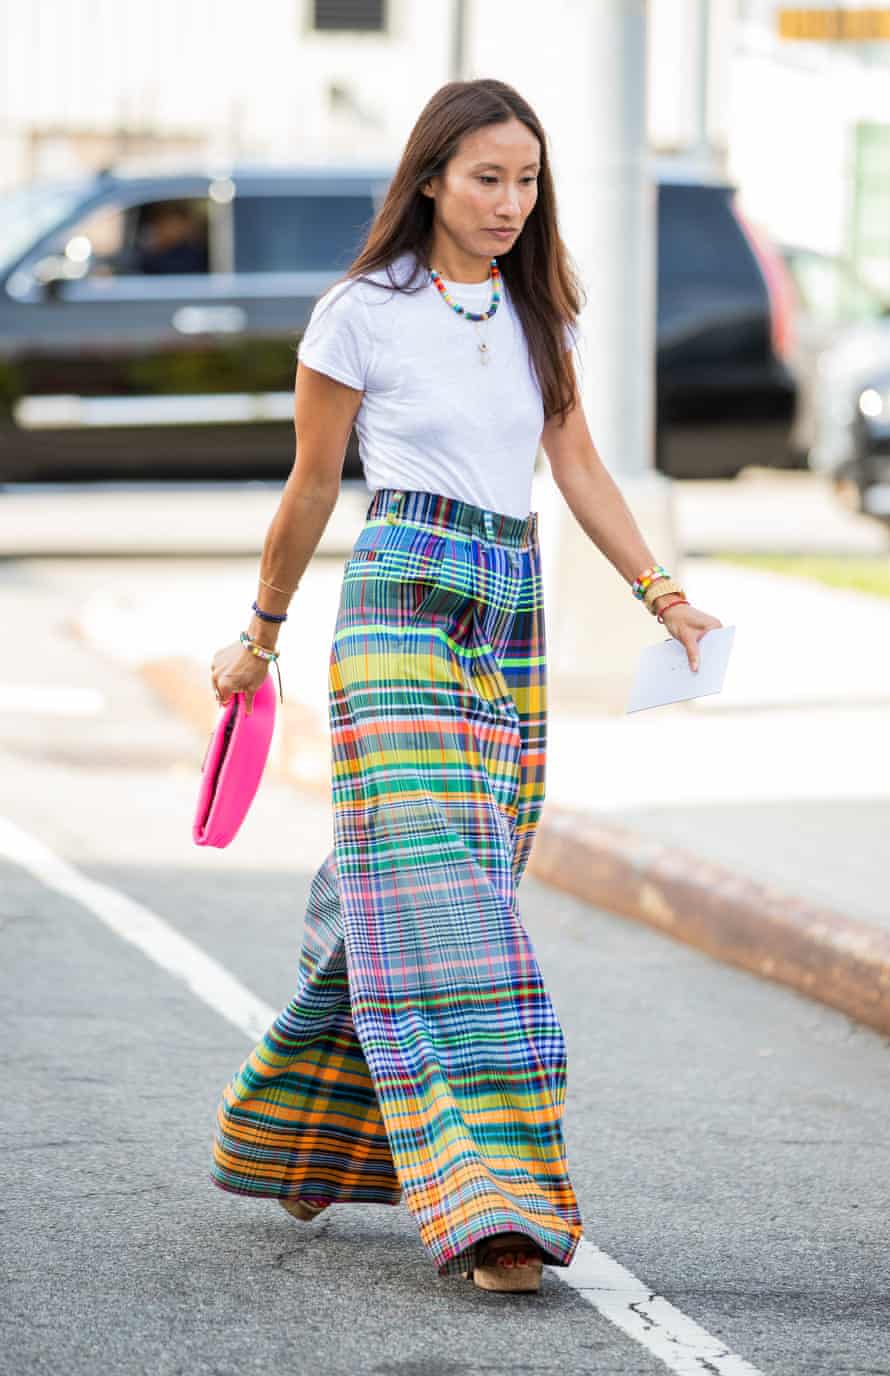 Elizabeth von der Goltz crossing a road in New York wearing multi-coloured plaid trousers and a white T-shirt